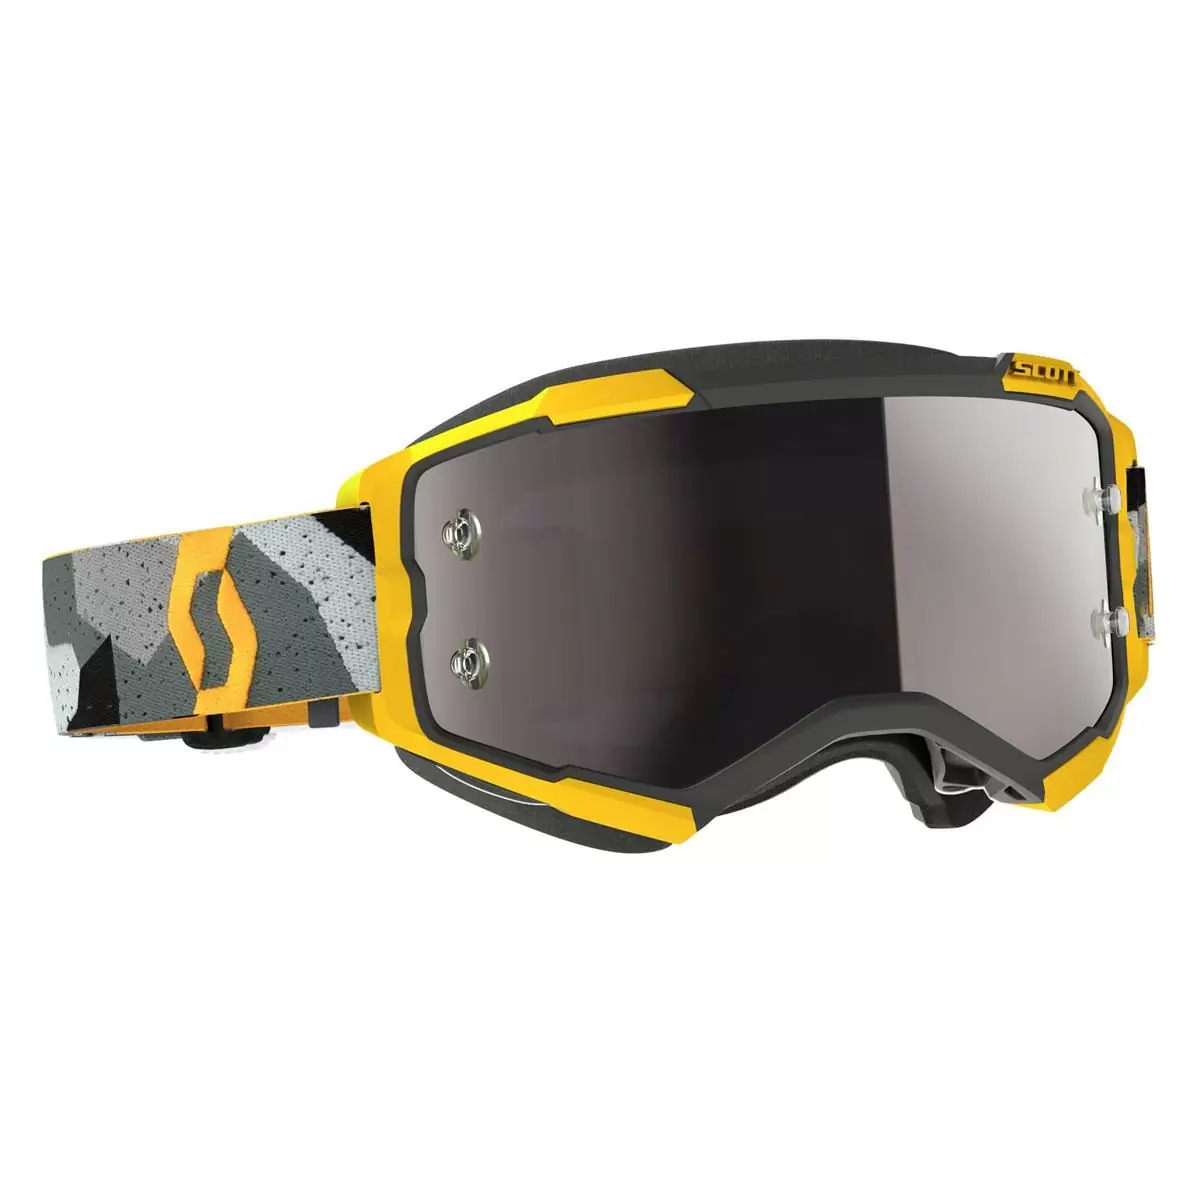 Fury goggle Yellow/Grey Silver Chrome Works Lens - image